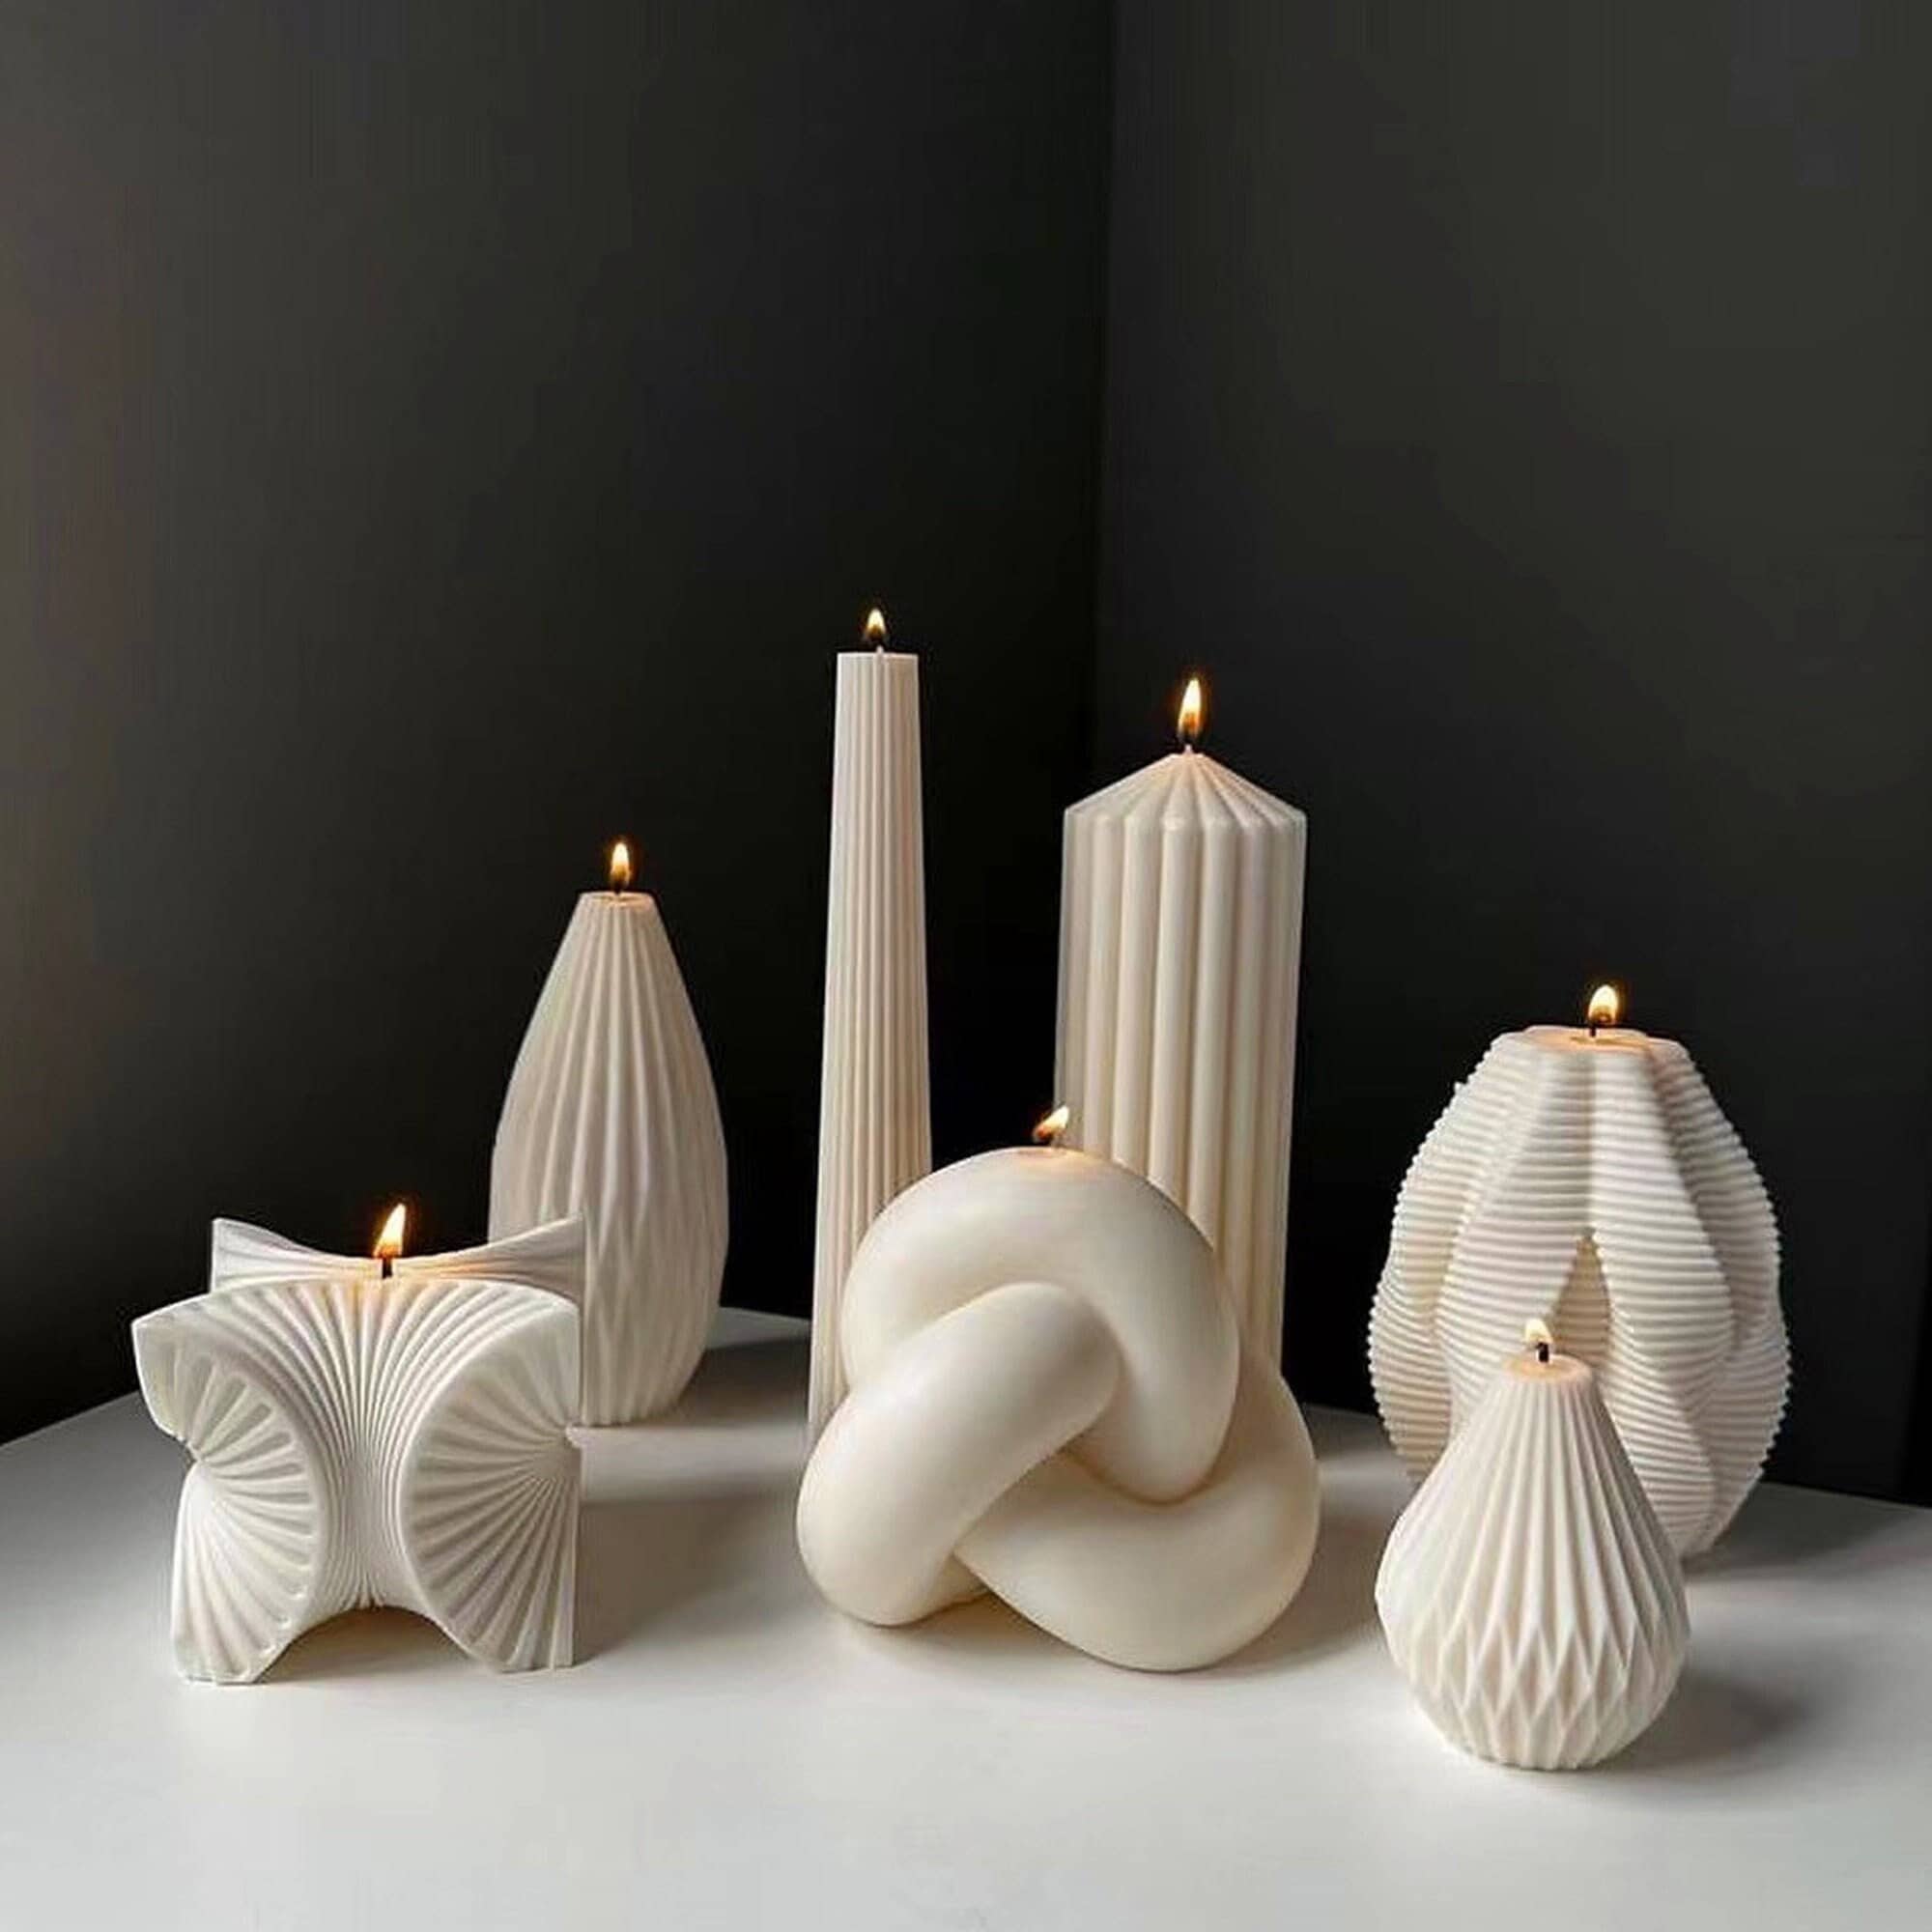 Duoleda 5 Piece Plastic Candle Molds Set for Candle India